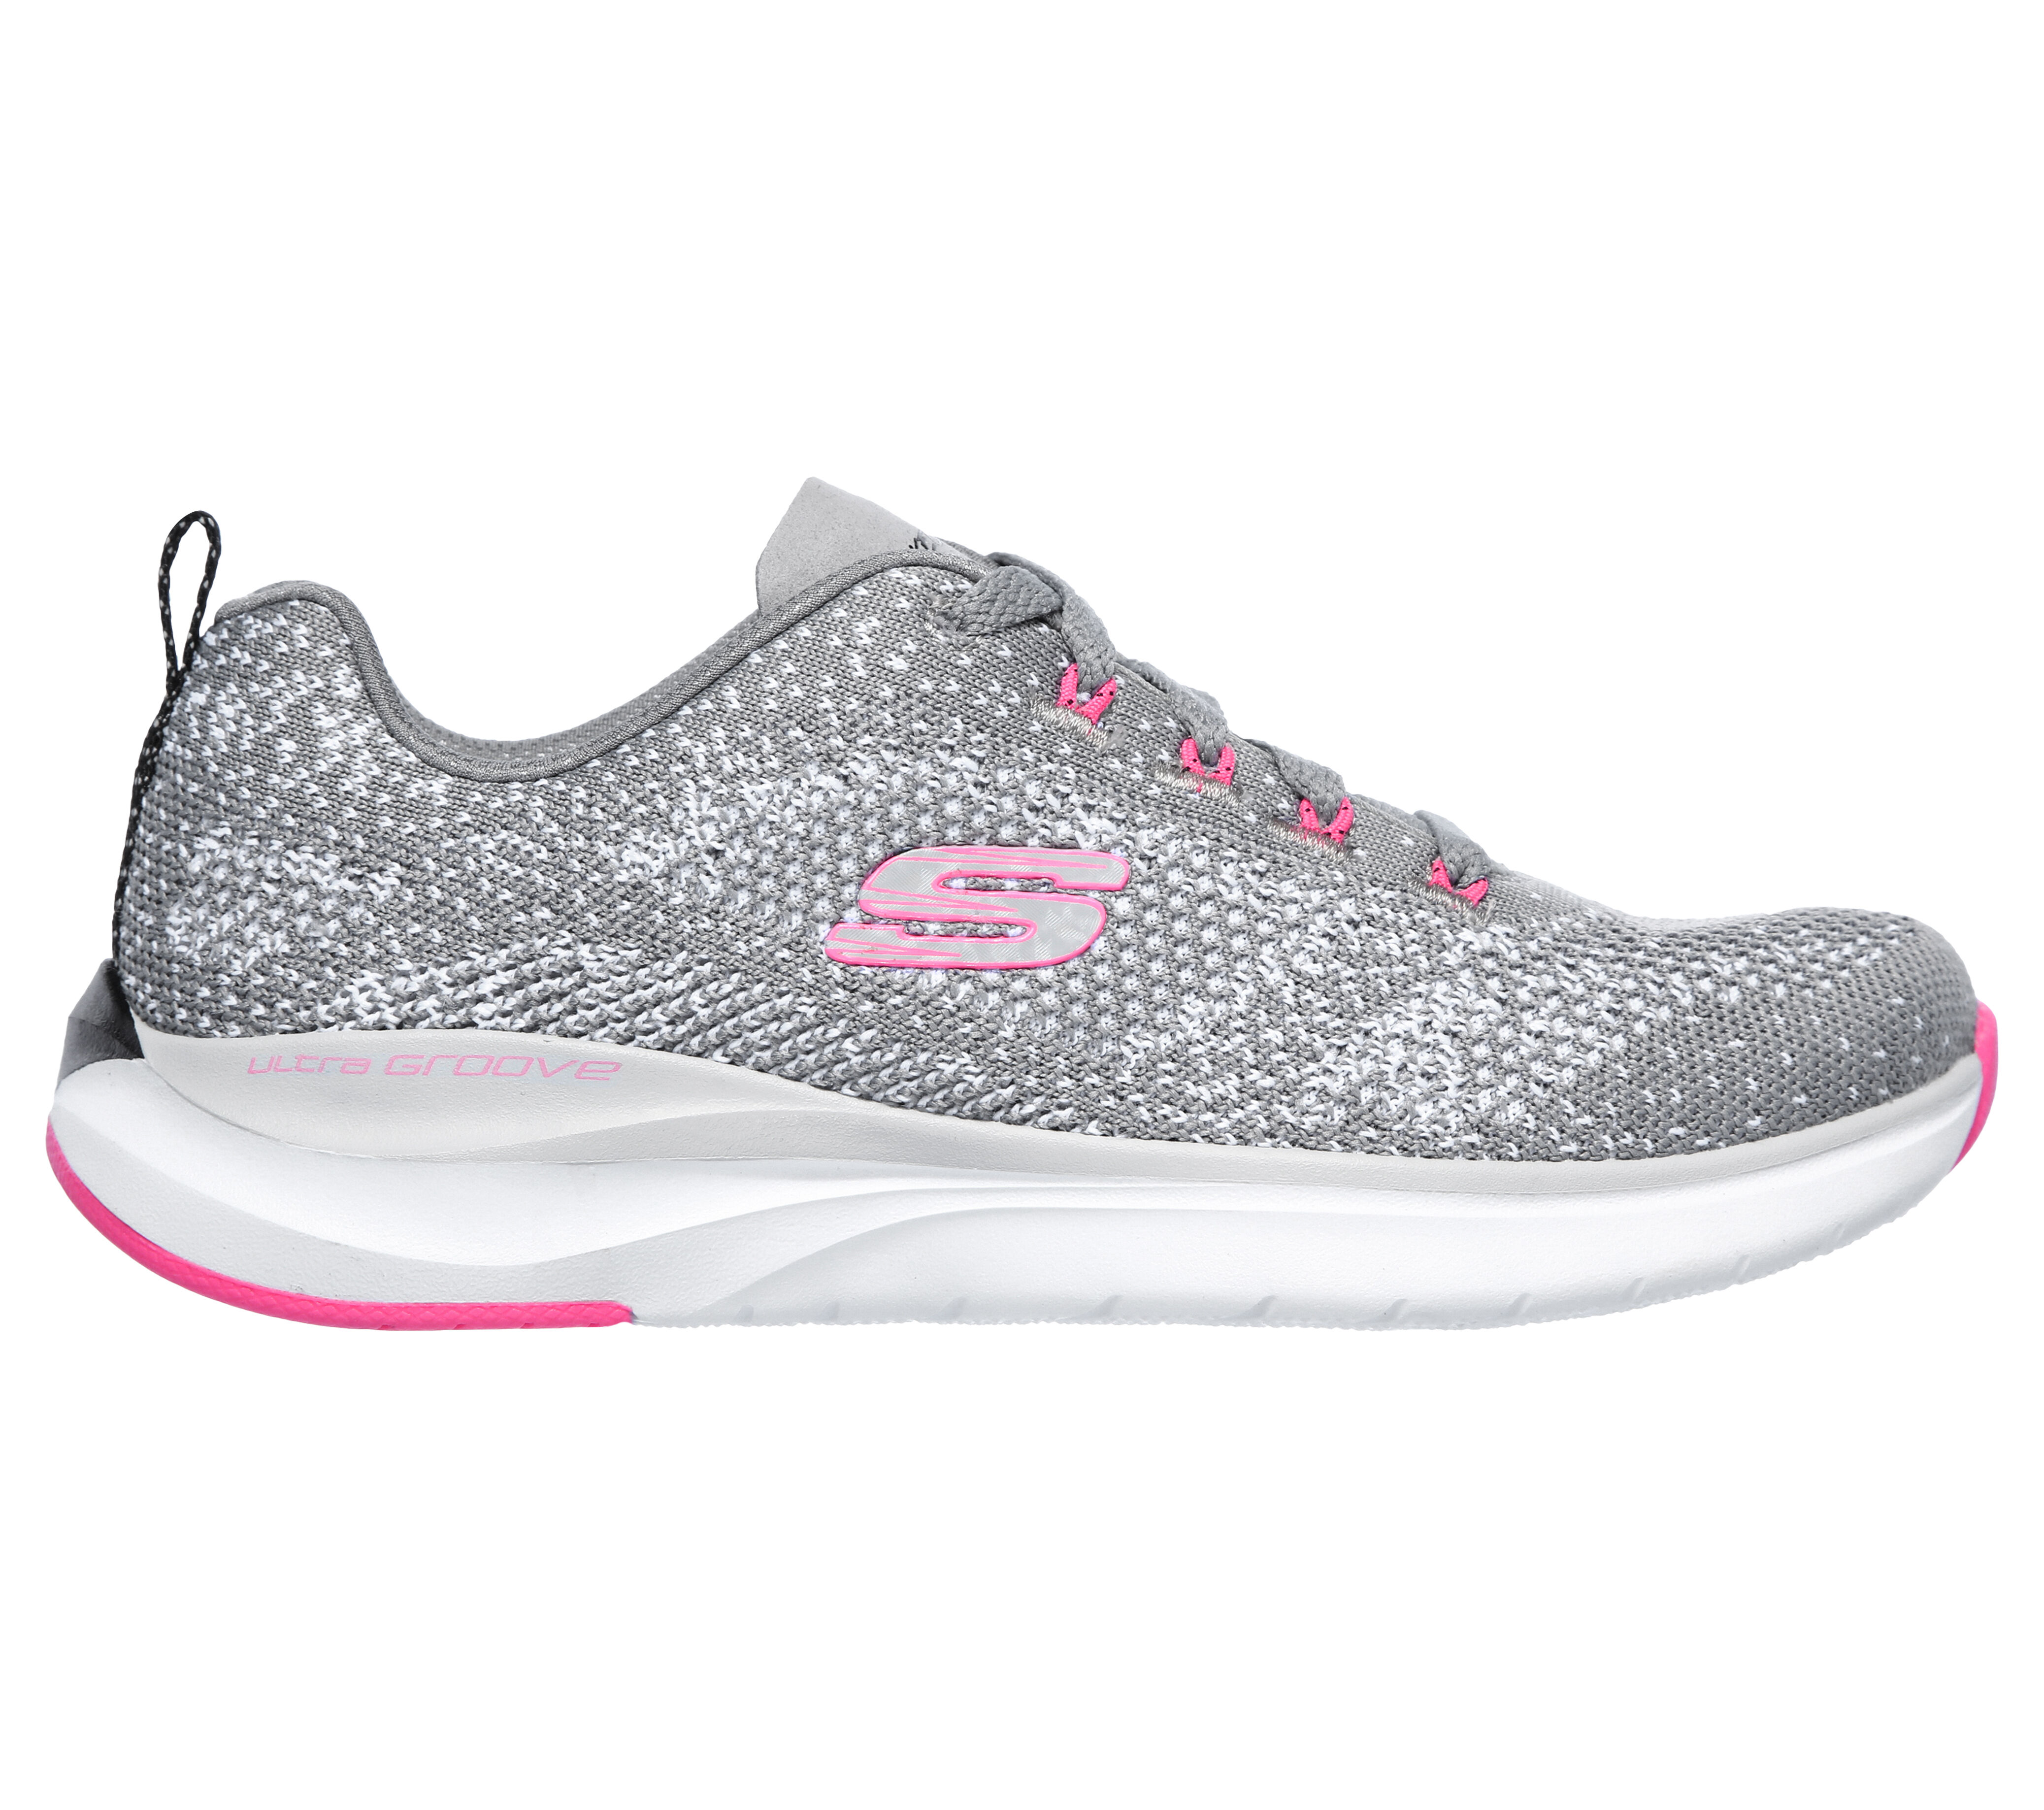 skechers bright pink shoes